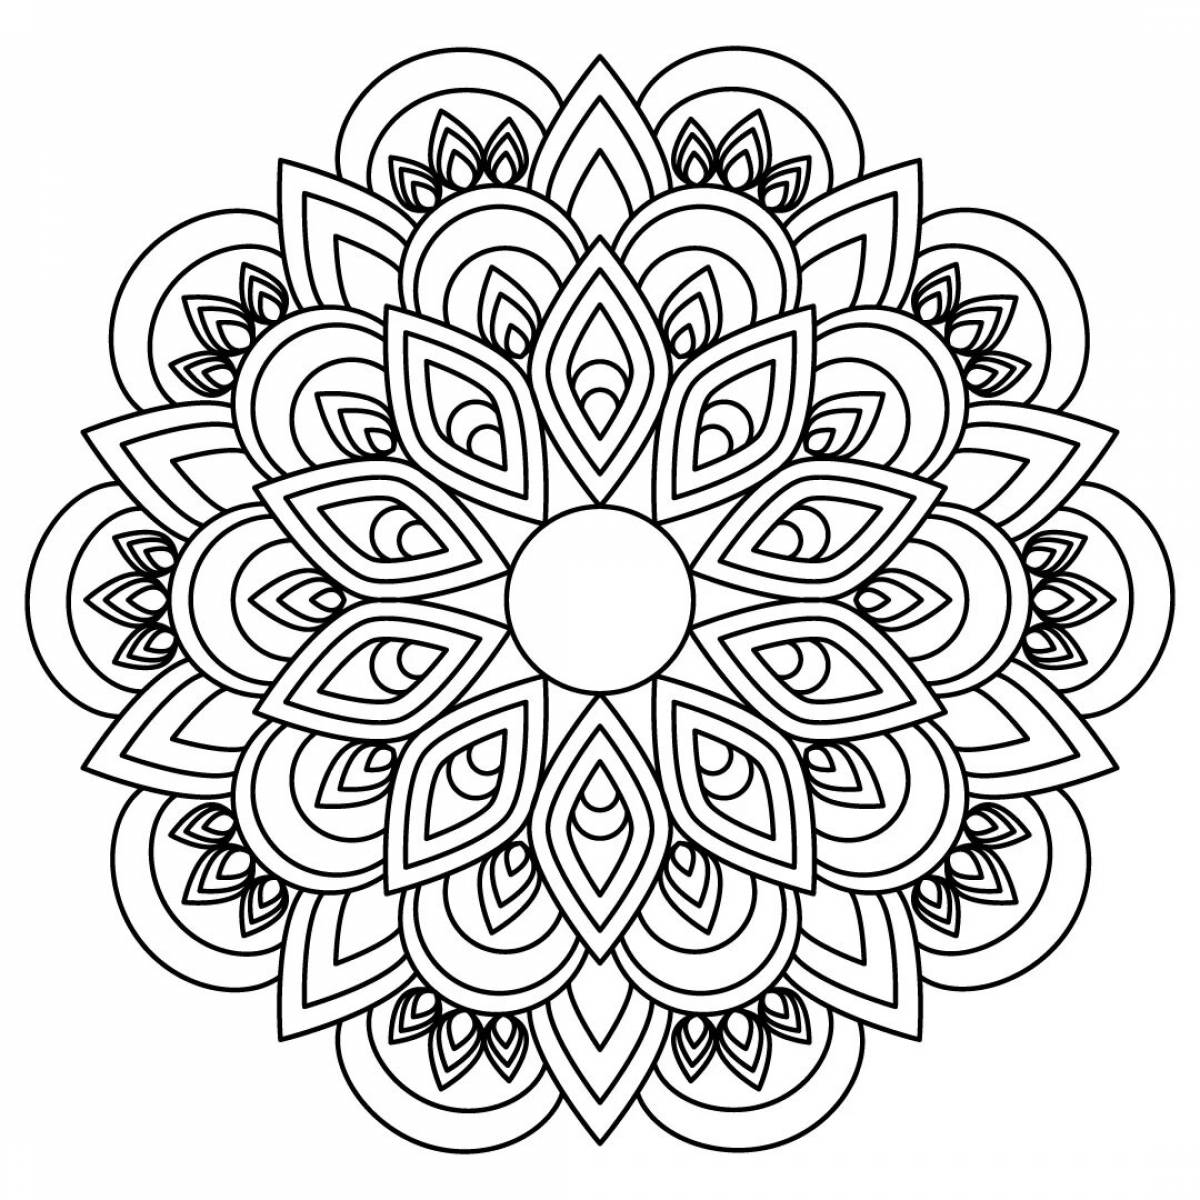 Mandala for good luck and success in everything #12